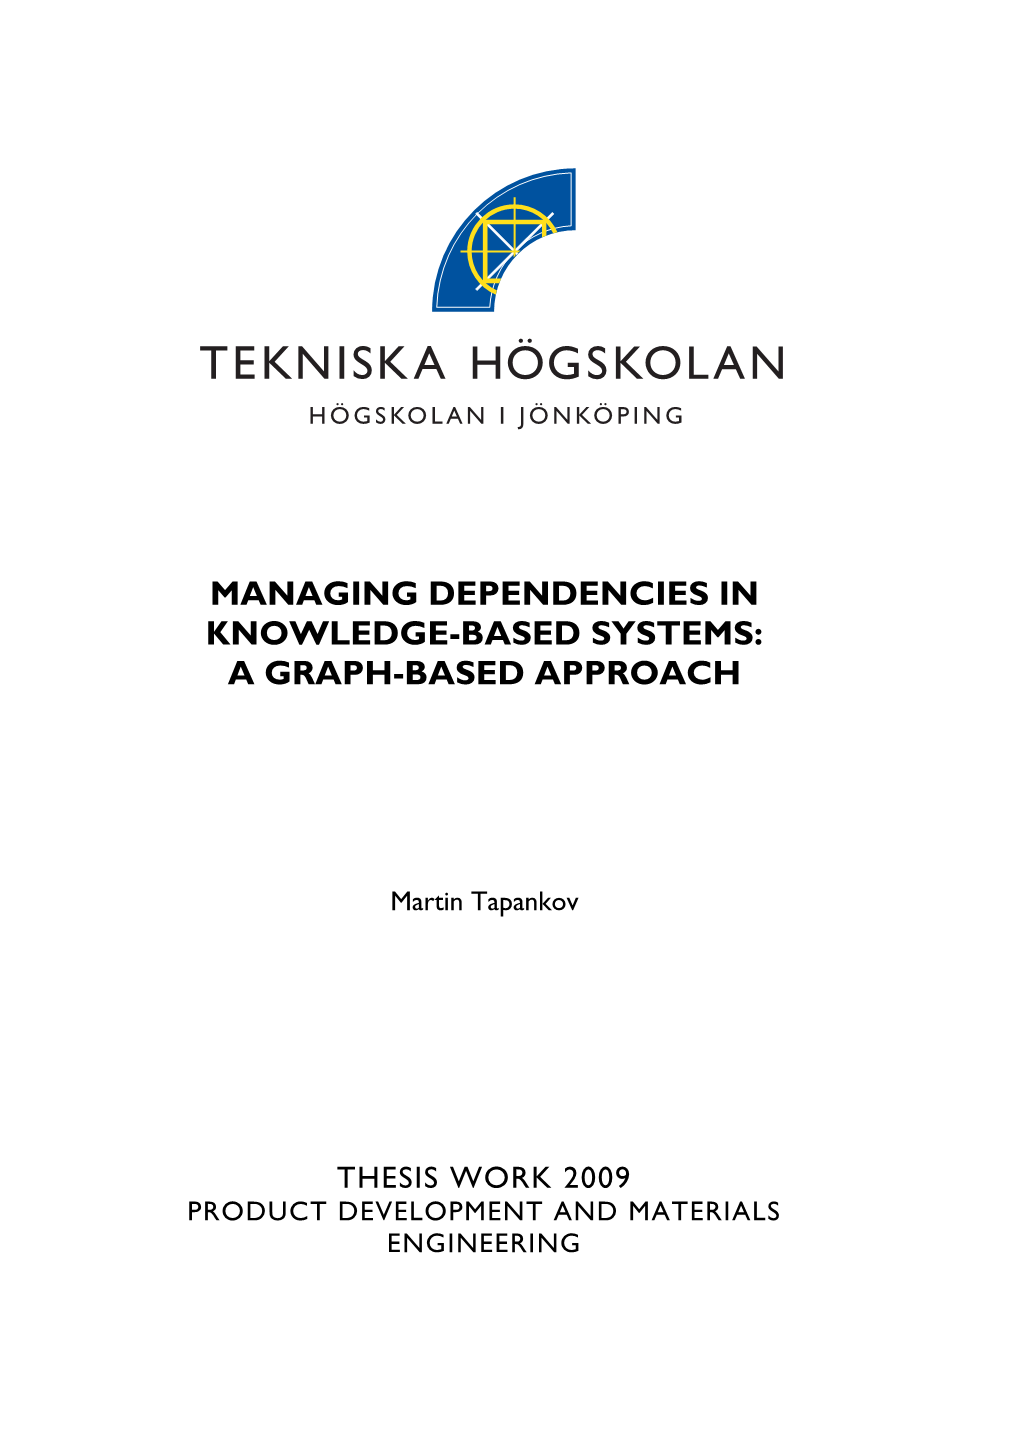 Managing Dependencies in Knowledge-Based Systems: a Graph-Based Approach